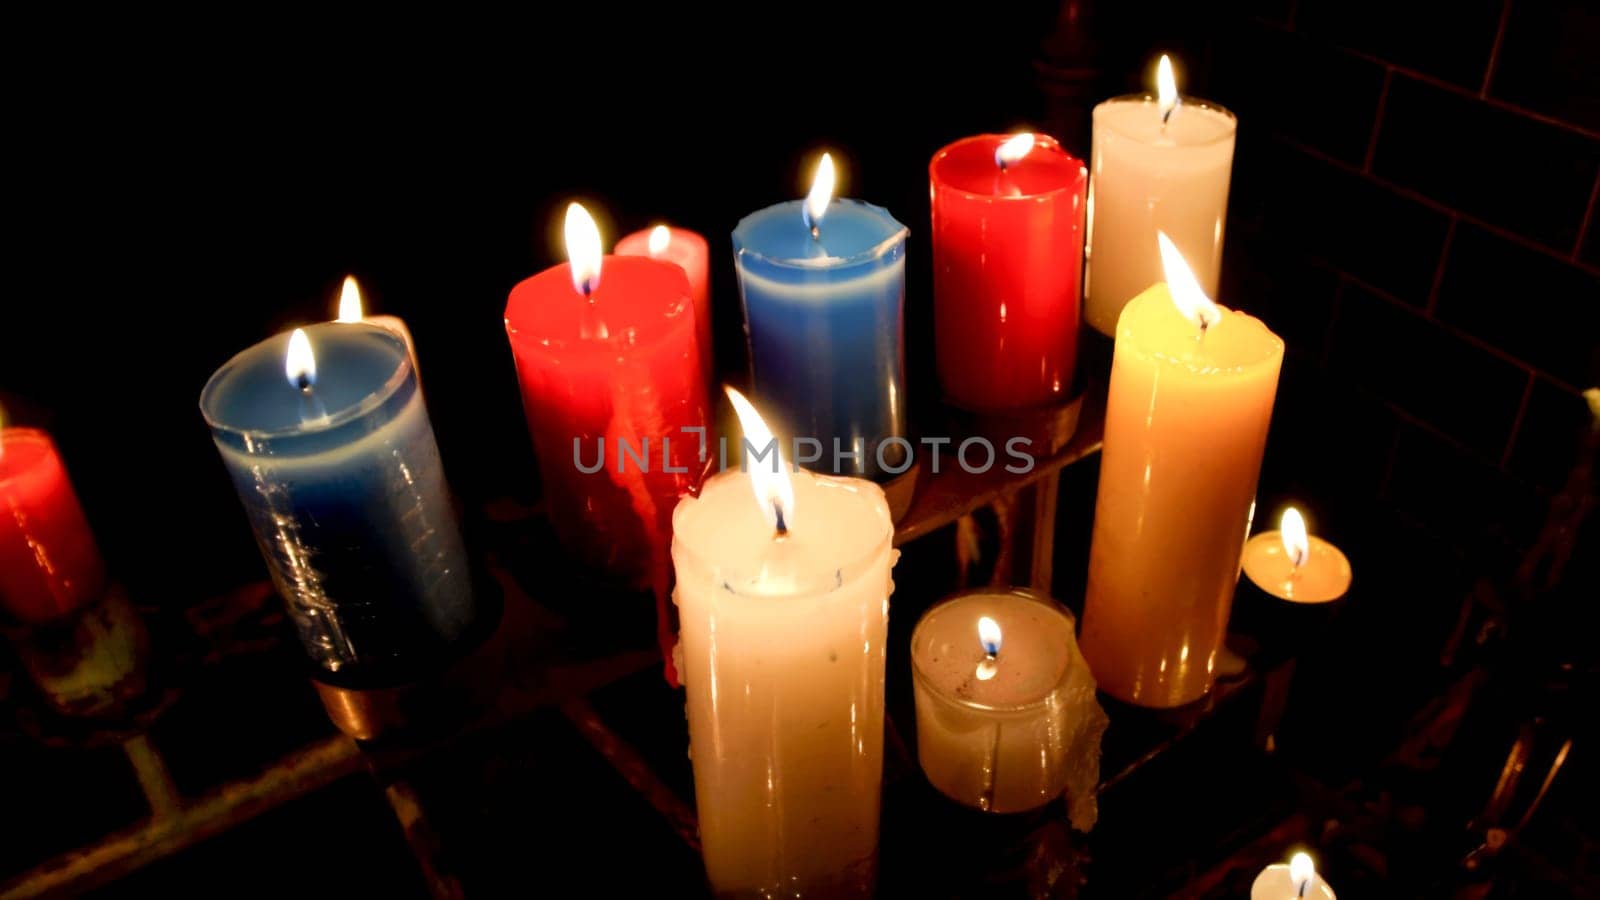 Assorted lit candles in a dark setting, creating a serene and warm atmosphere by Peruphotoart